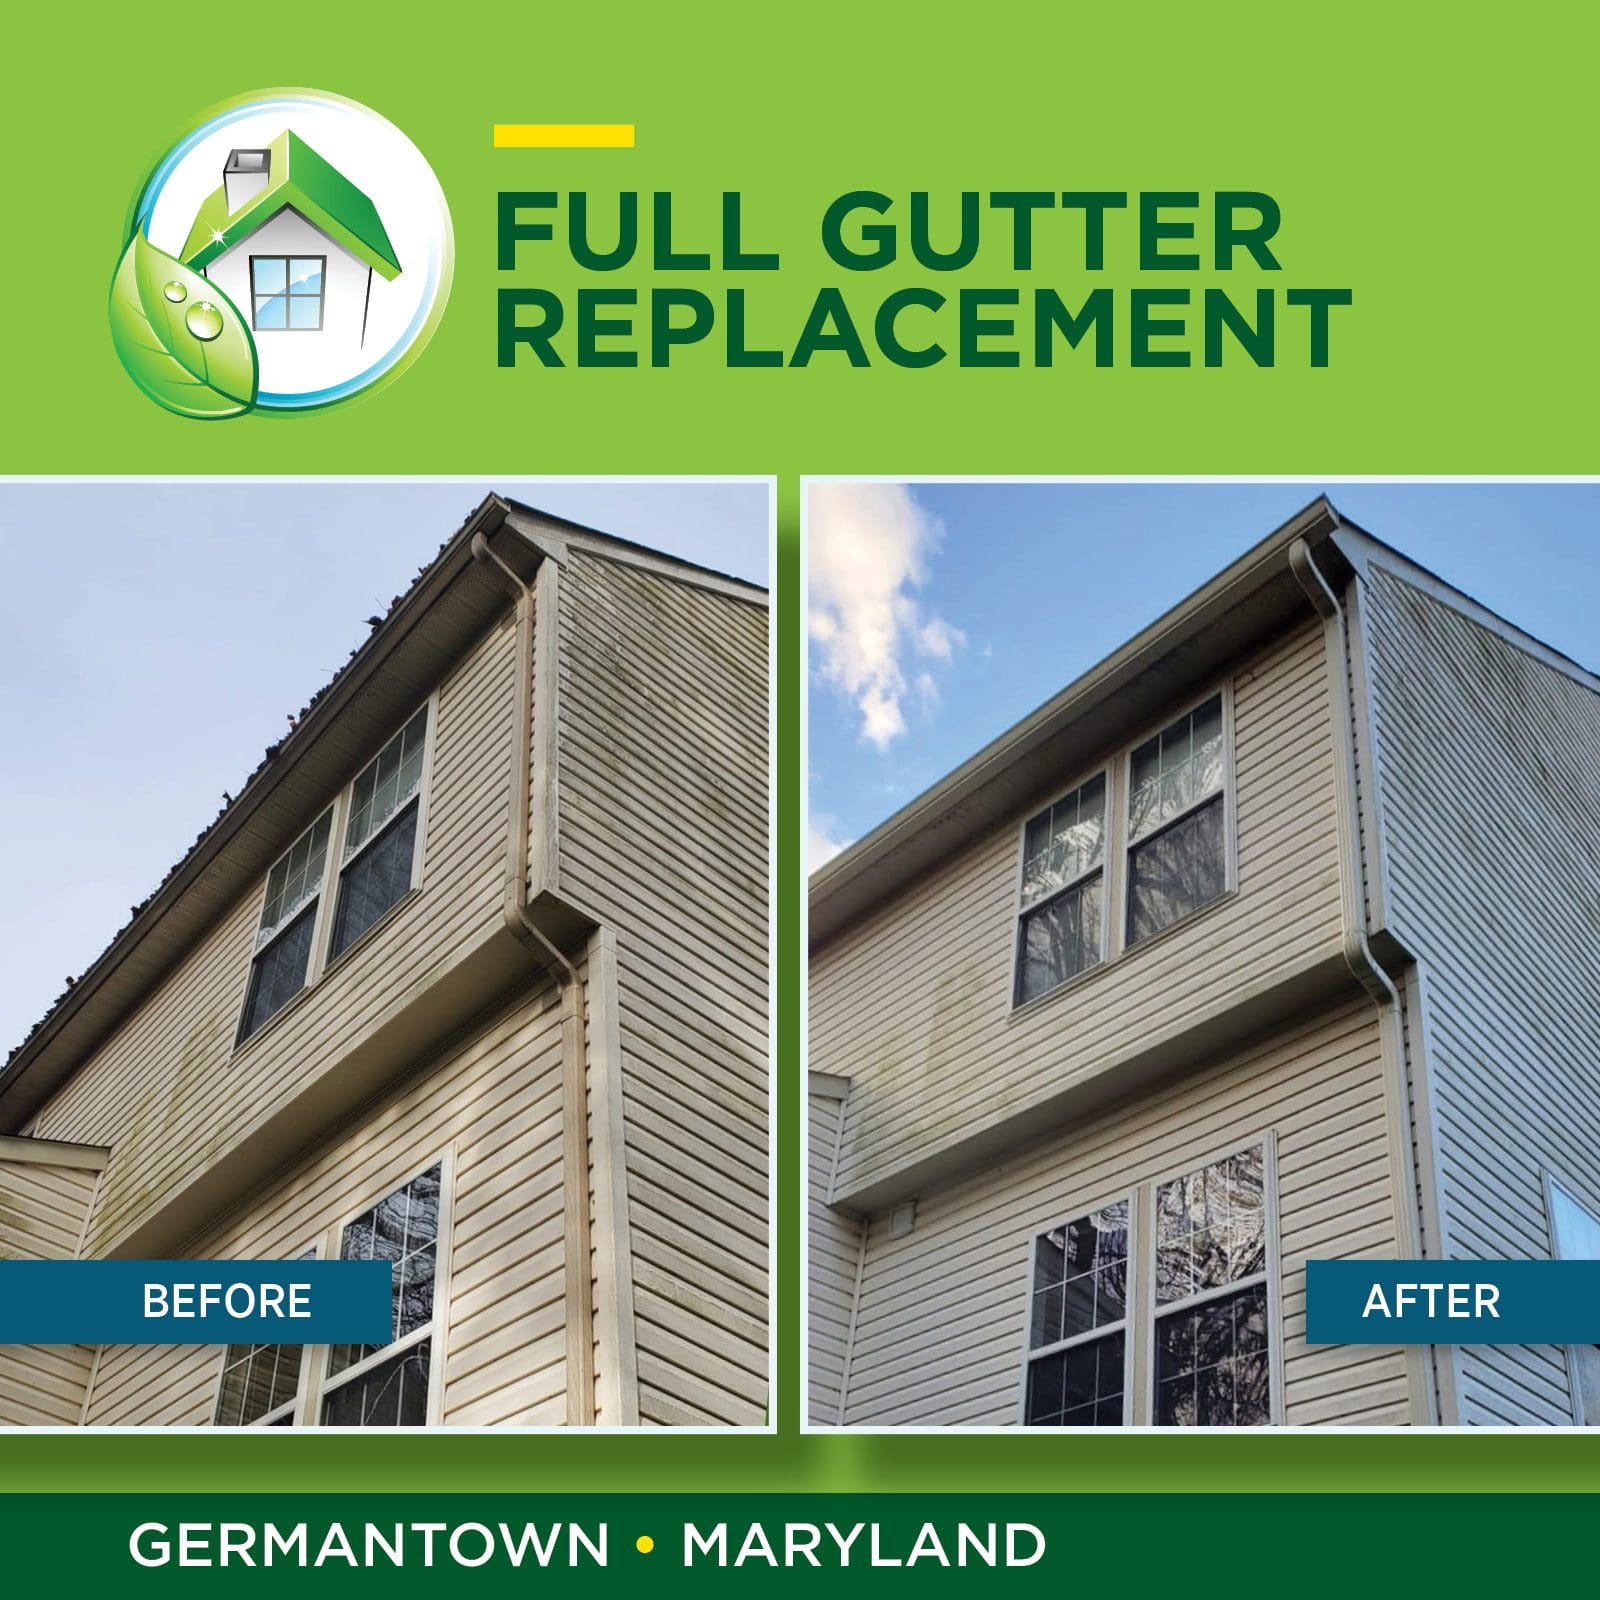 Full gutter replacement in Germantown Maryland